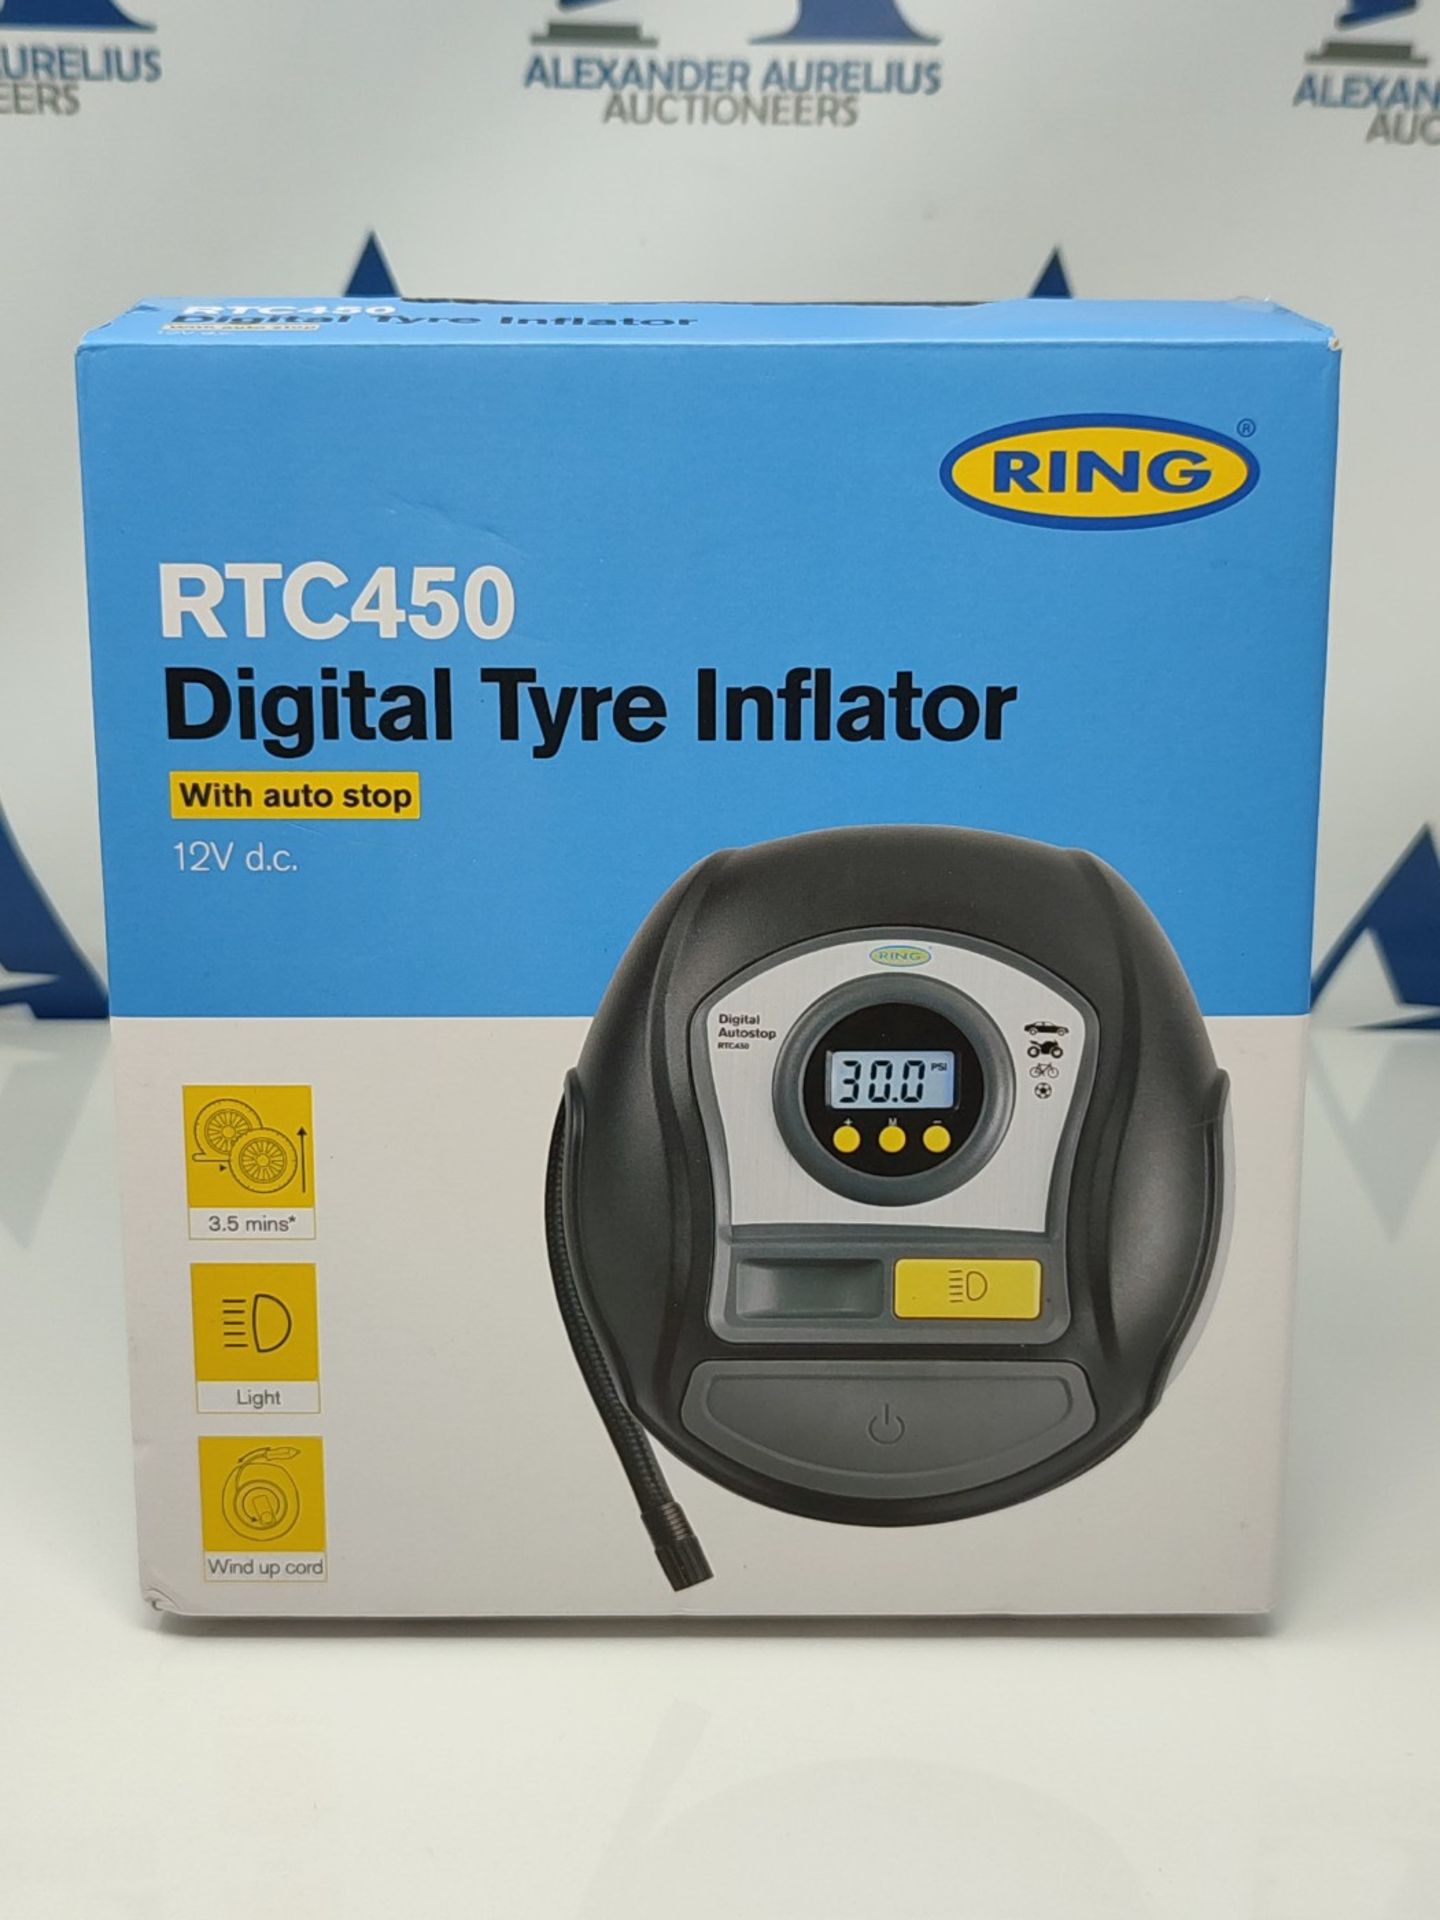 Ring Automotive - RTC450 Digital Tyre Inflator with Auto Stop, Memory, LED Light, Back - Image 2 of 12